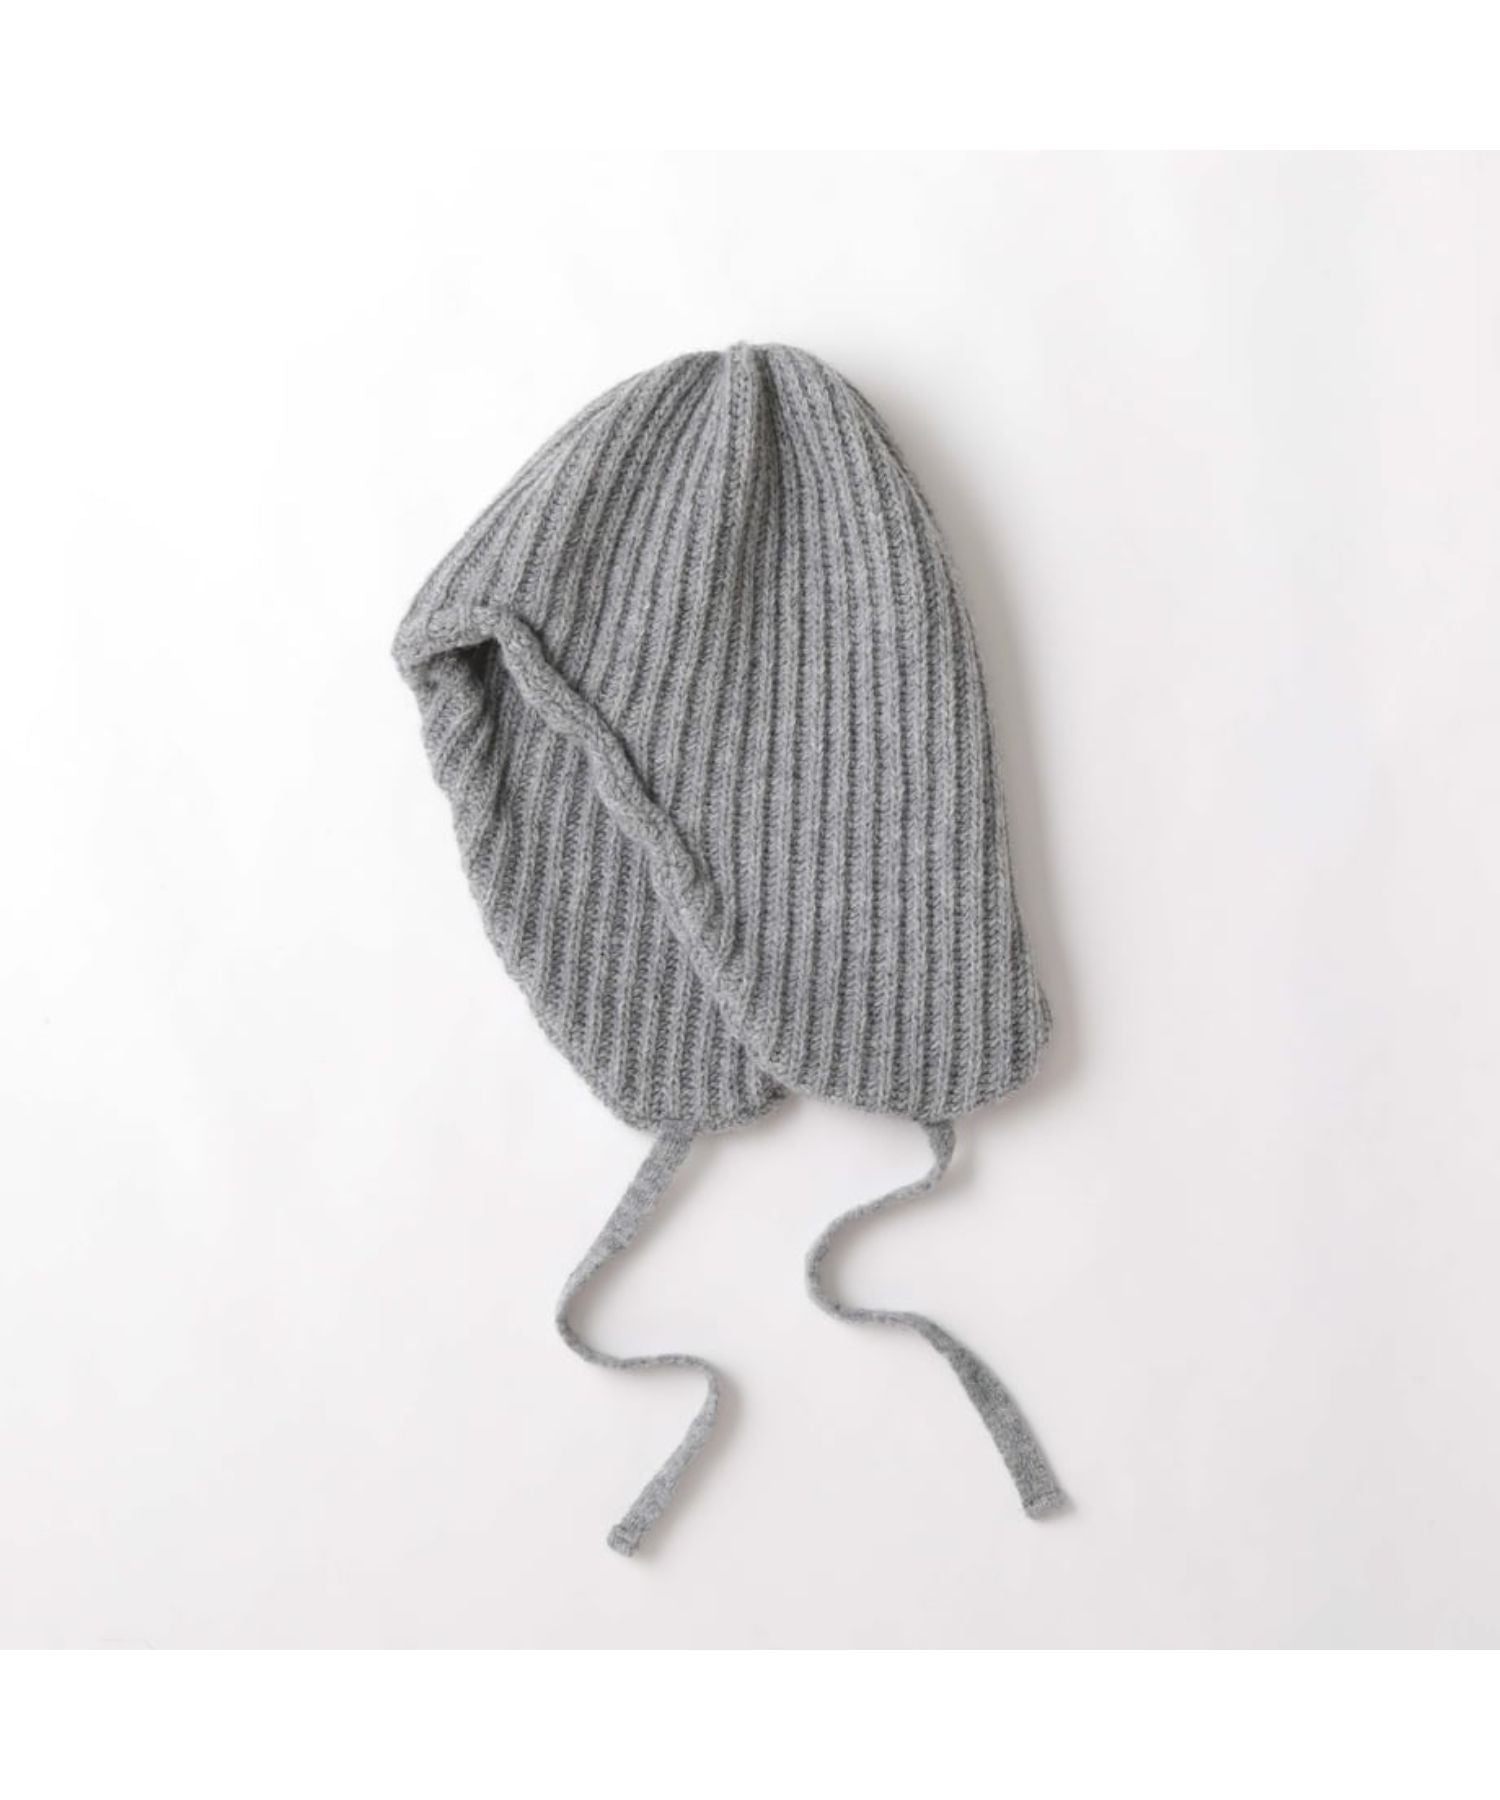 Ear Flap Knit Cap - S.F.C (Stripes For Creative) (エス